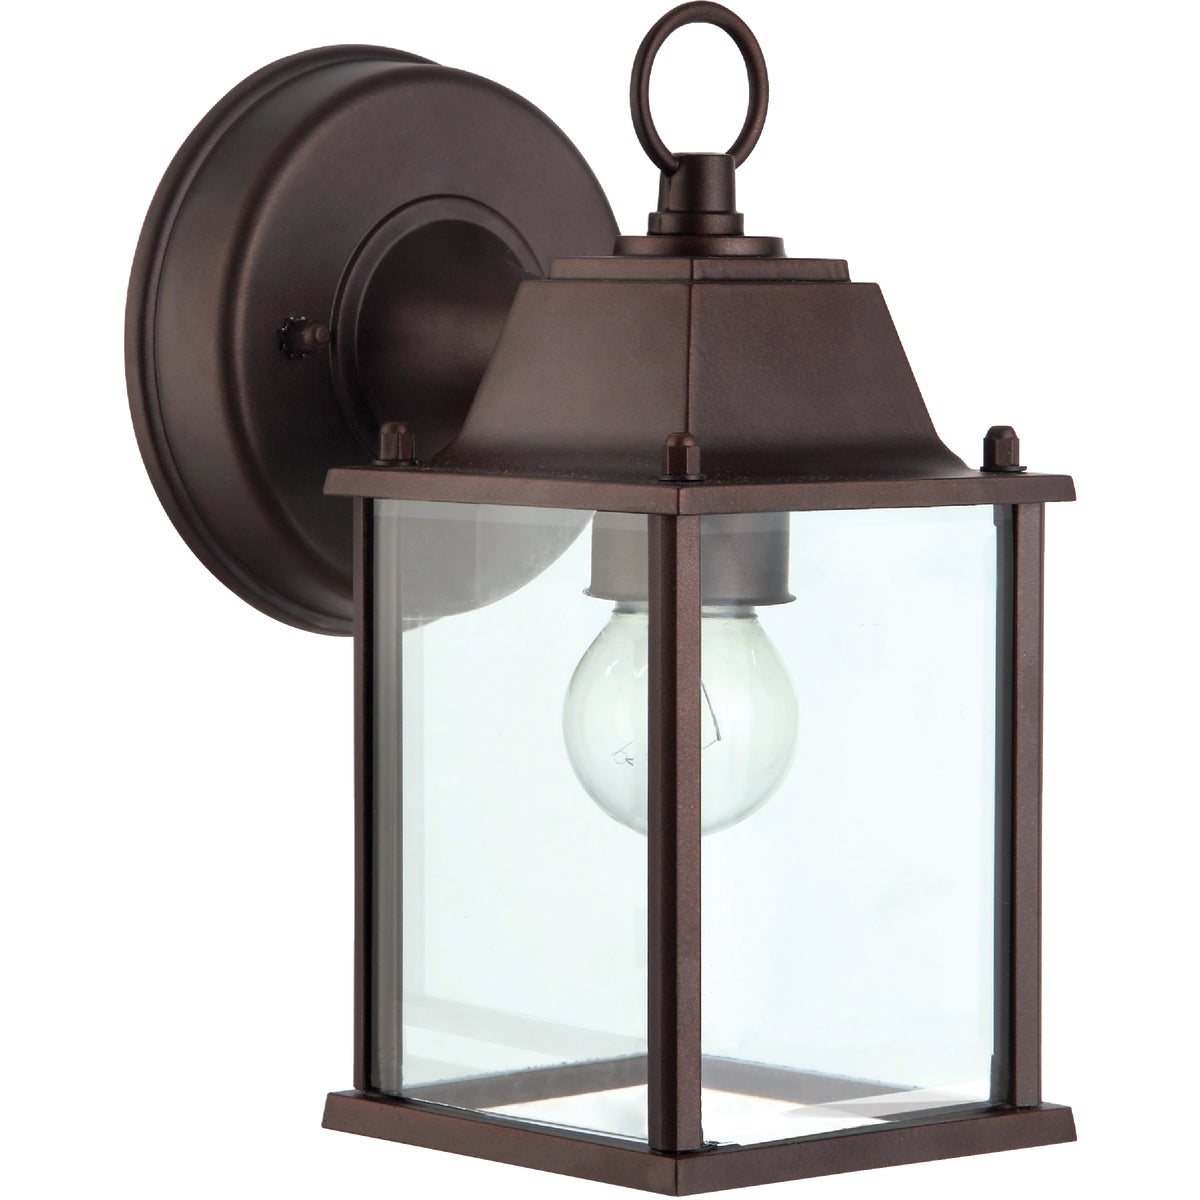 Home Impressions 100W Oil-Rubbed Bronze Incandescent Lantern Outdoor Wall Light Fixture